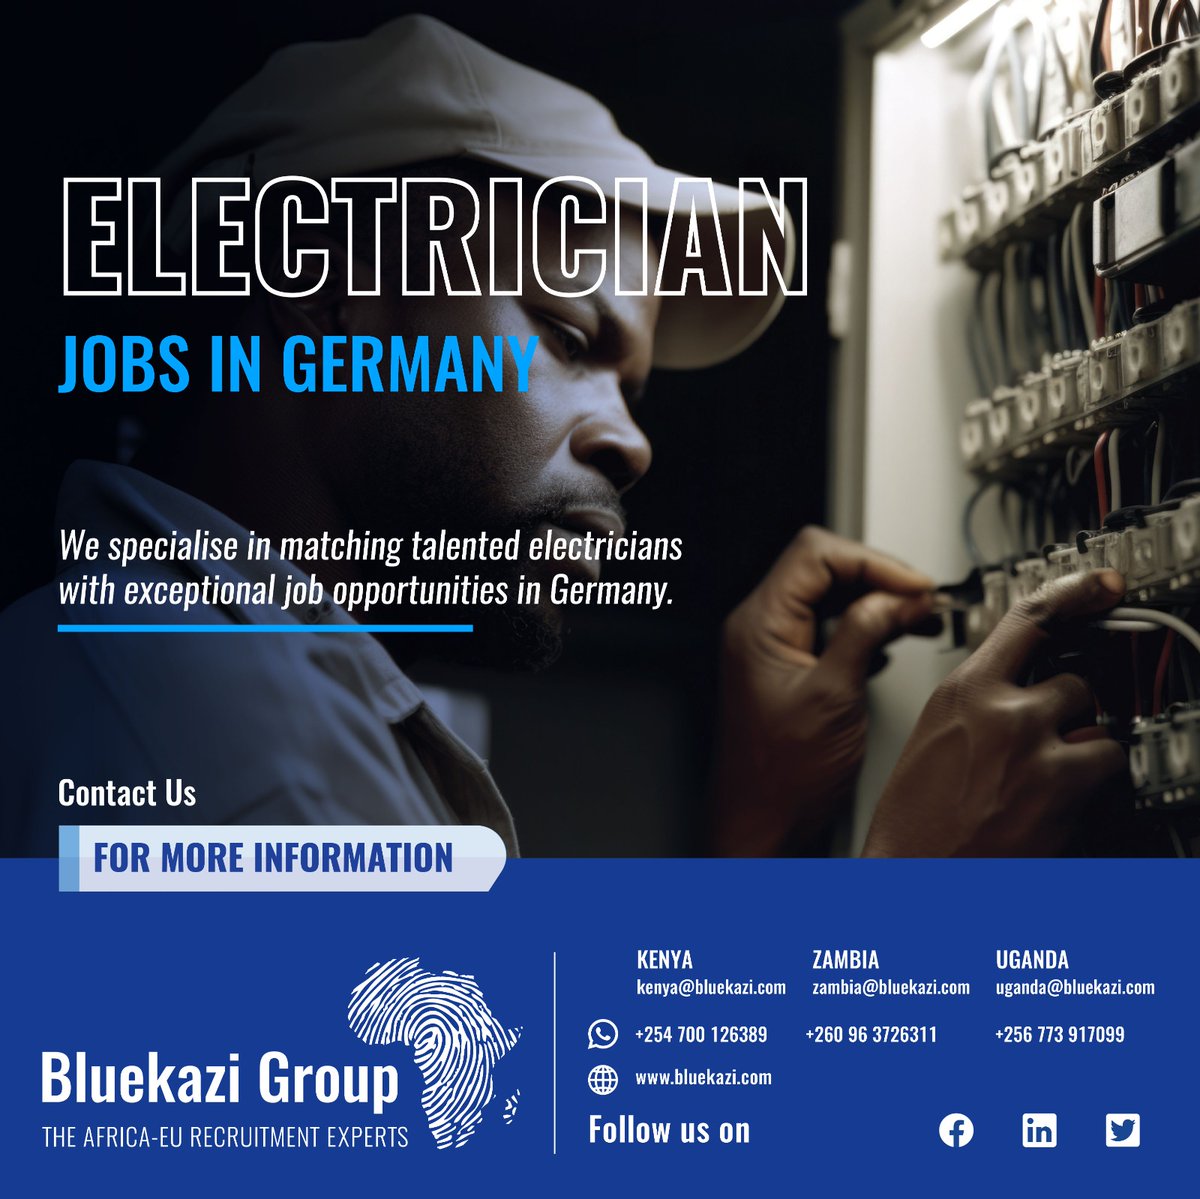 Are you a skilled electrician seeking an exciting international experience?Our recruitment agency specializes in placing skilled electricians in rewarding job opportunities across Germany.Contact us for further guidance and information.
 #germanyjobs #electriciancareers